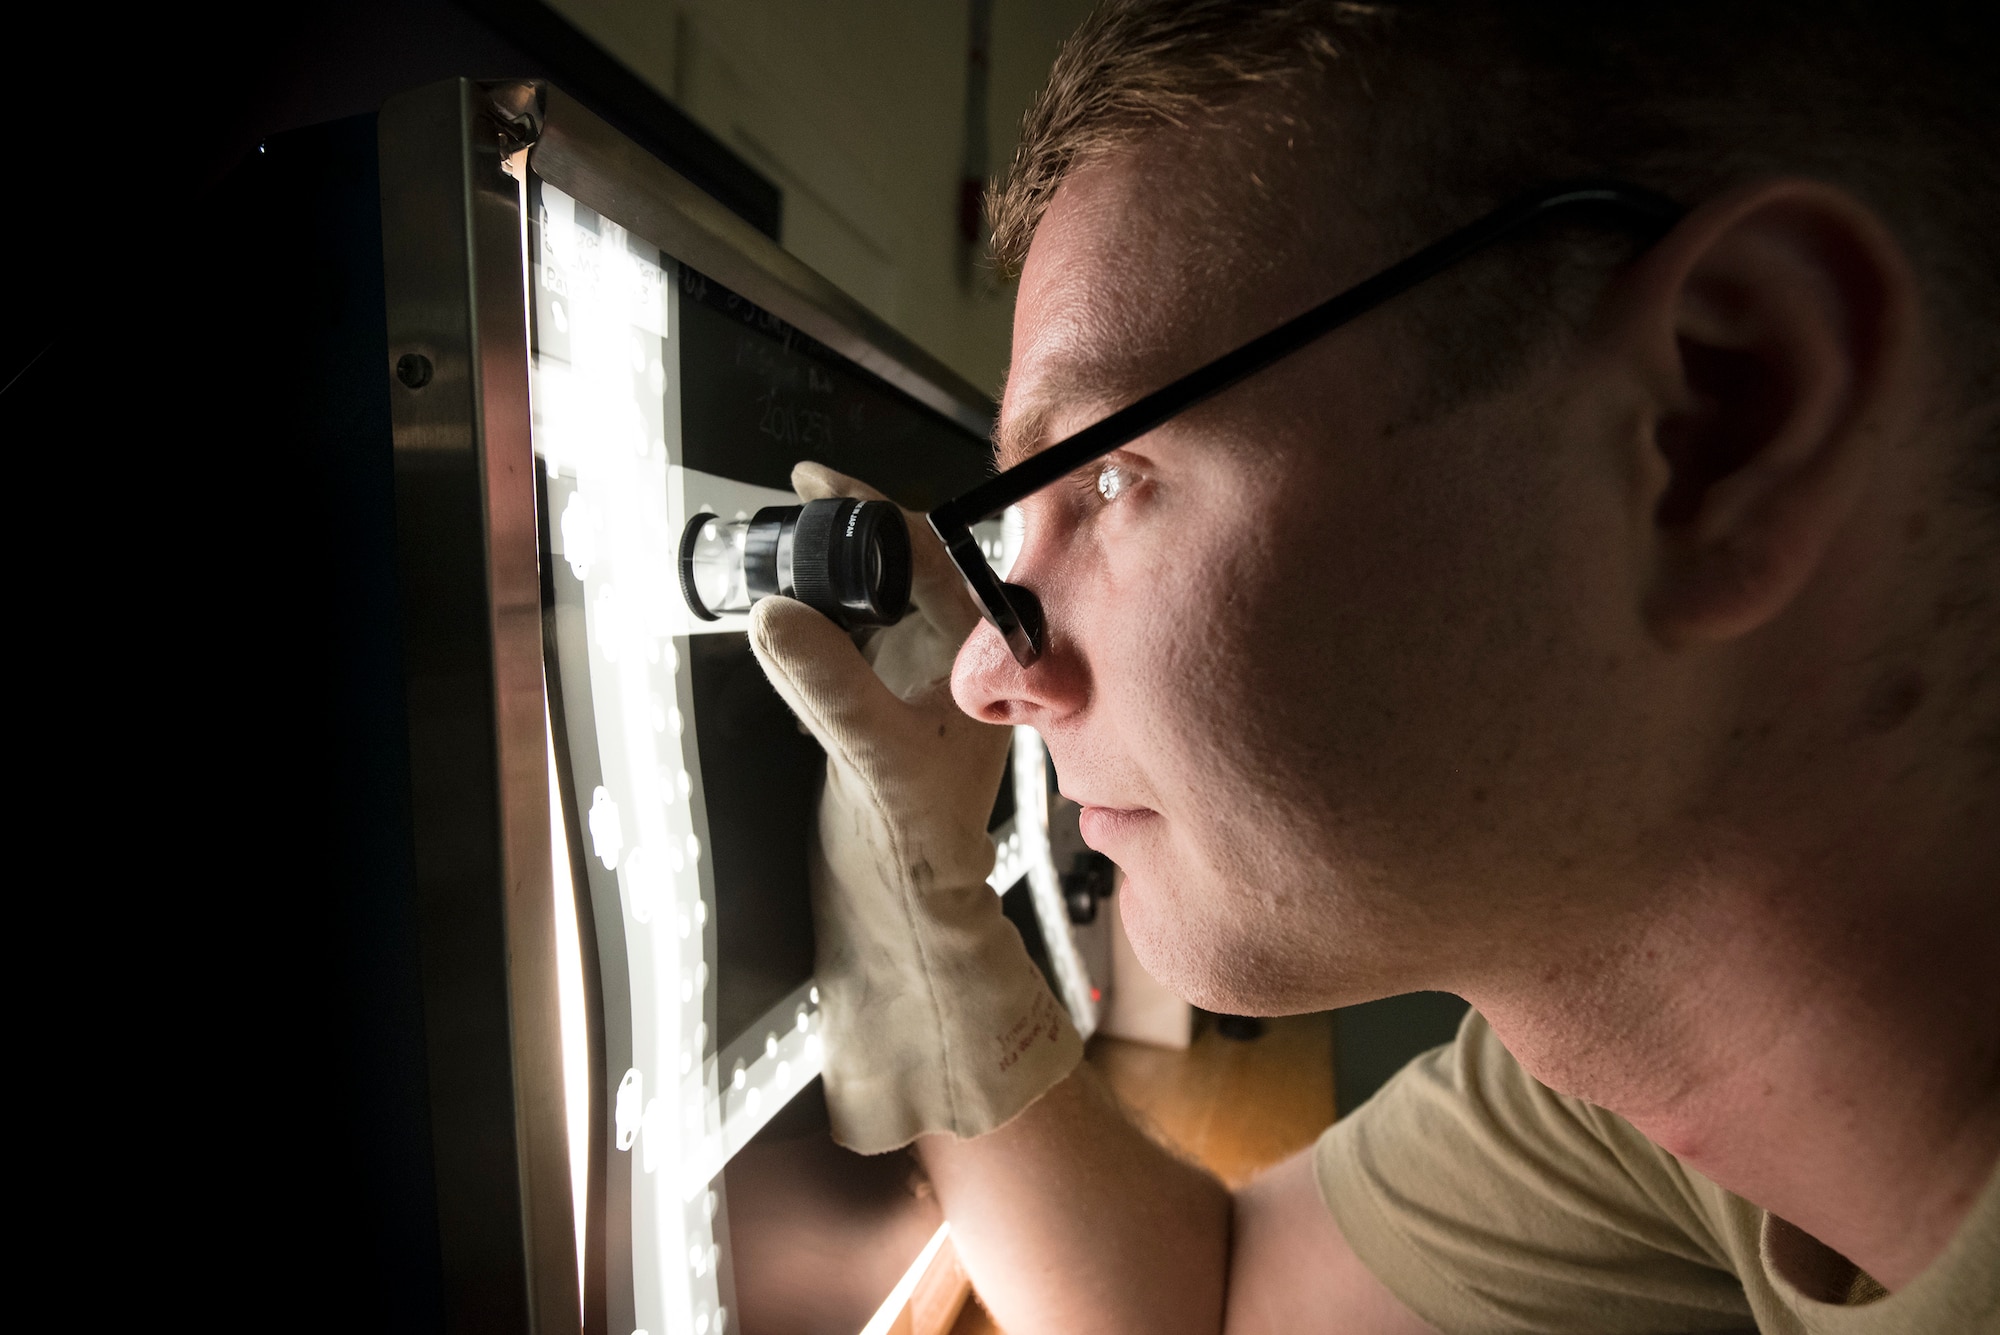 U.S. Air Force Senior Airman Austin Aldridge, 23d Maintenance Squadron non-destructive inspection (NDI) specialist, inspects an aircraft part through an X-ray at Moody Air Force Base, Ga., May 2, 2018. NDI technicians use various methods to complete these inspections, such as X-ray, florescent dye penetrant, oil analysis, and ultrasonic scanning to examine and inspect numerous aircraft parts and components to ensure they are in usable condition. (U.S. Air Force photo by Airman 1st Class Eugene Oliver)